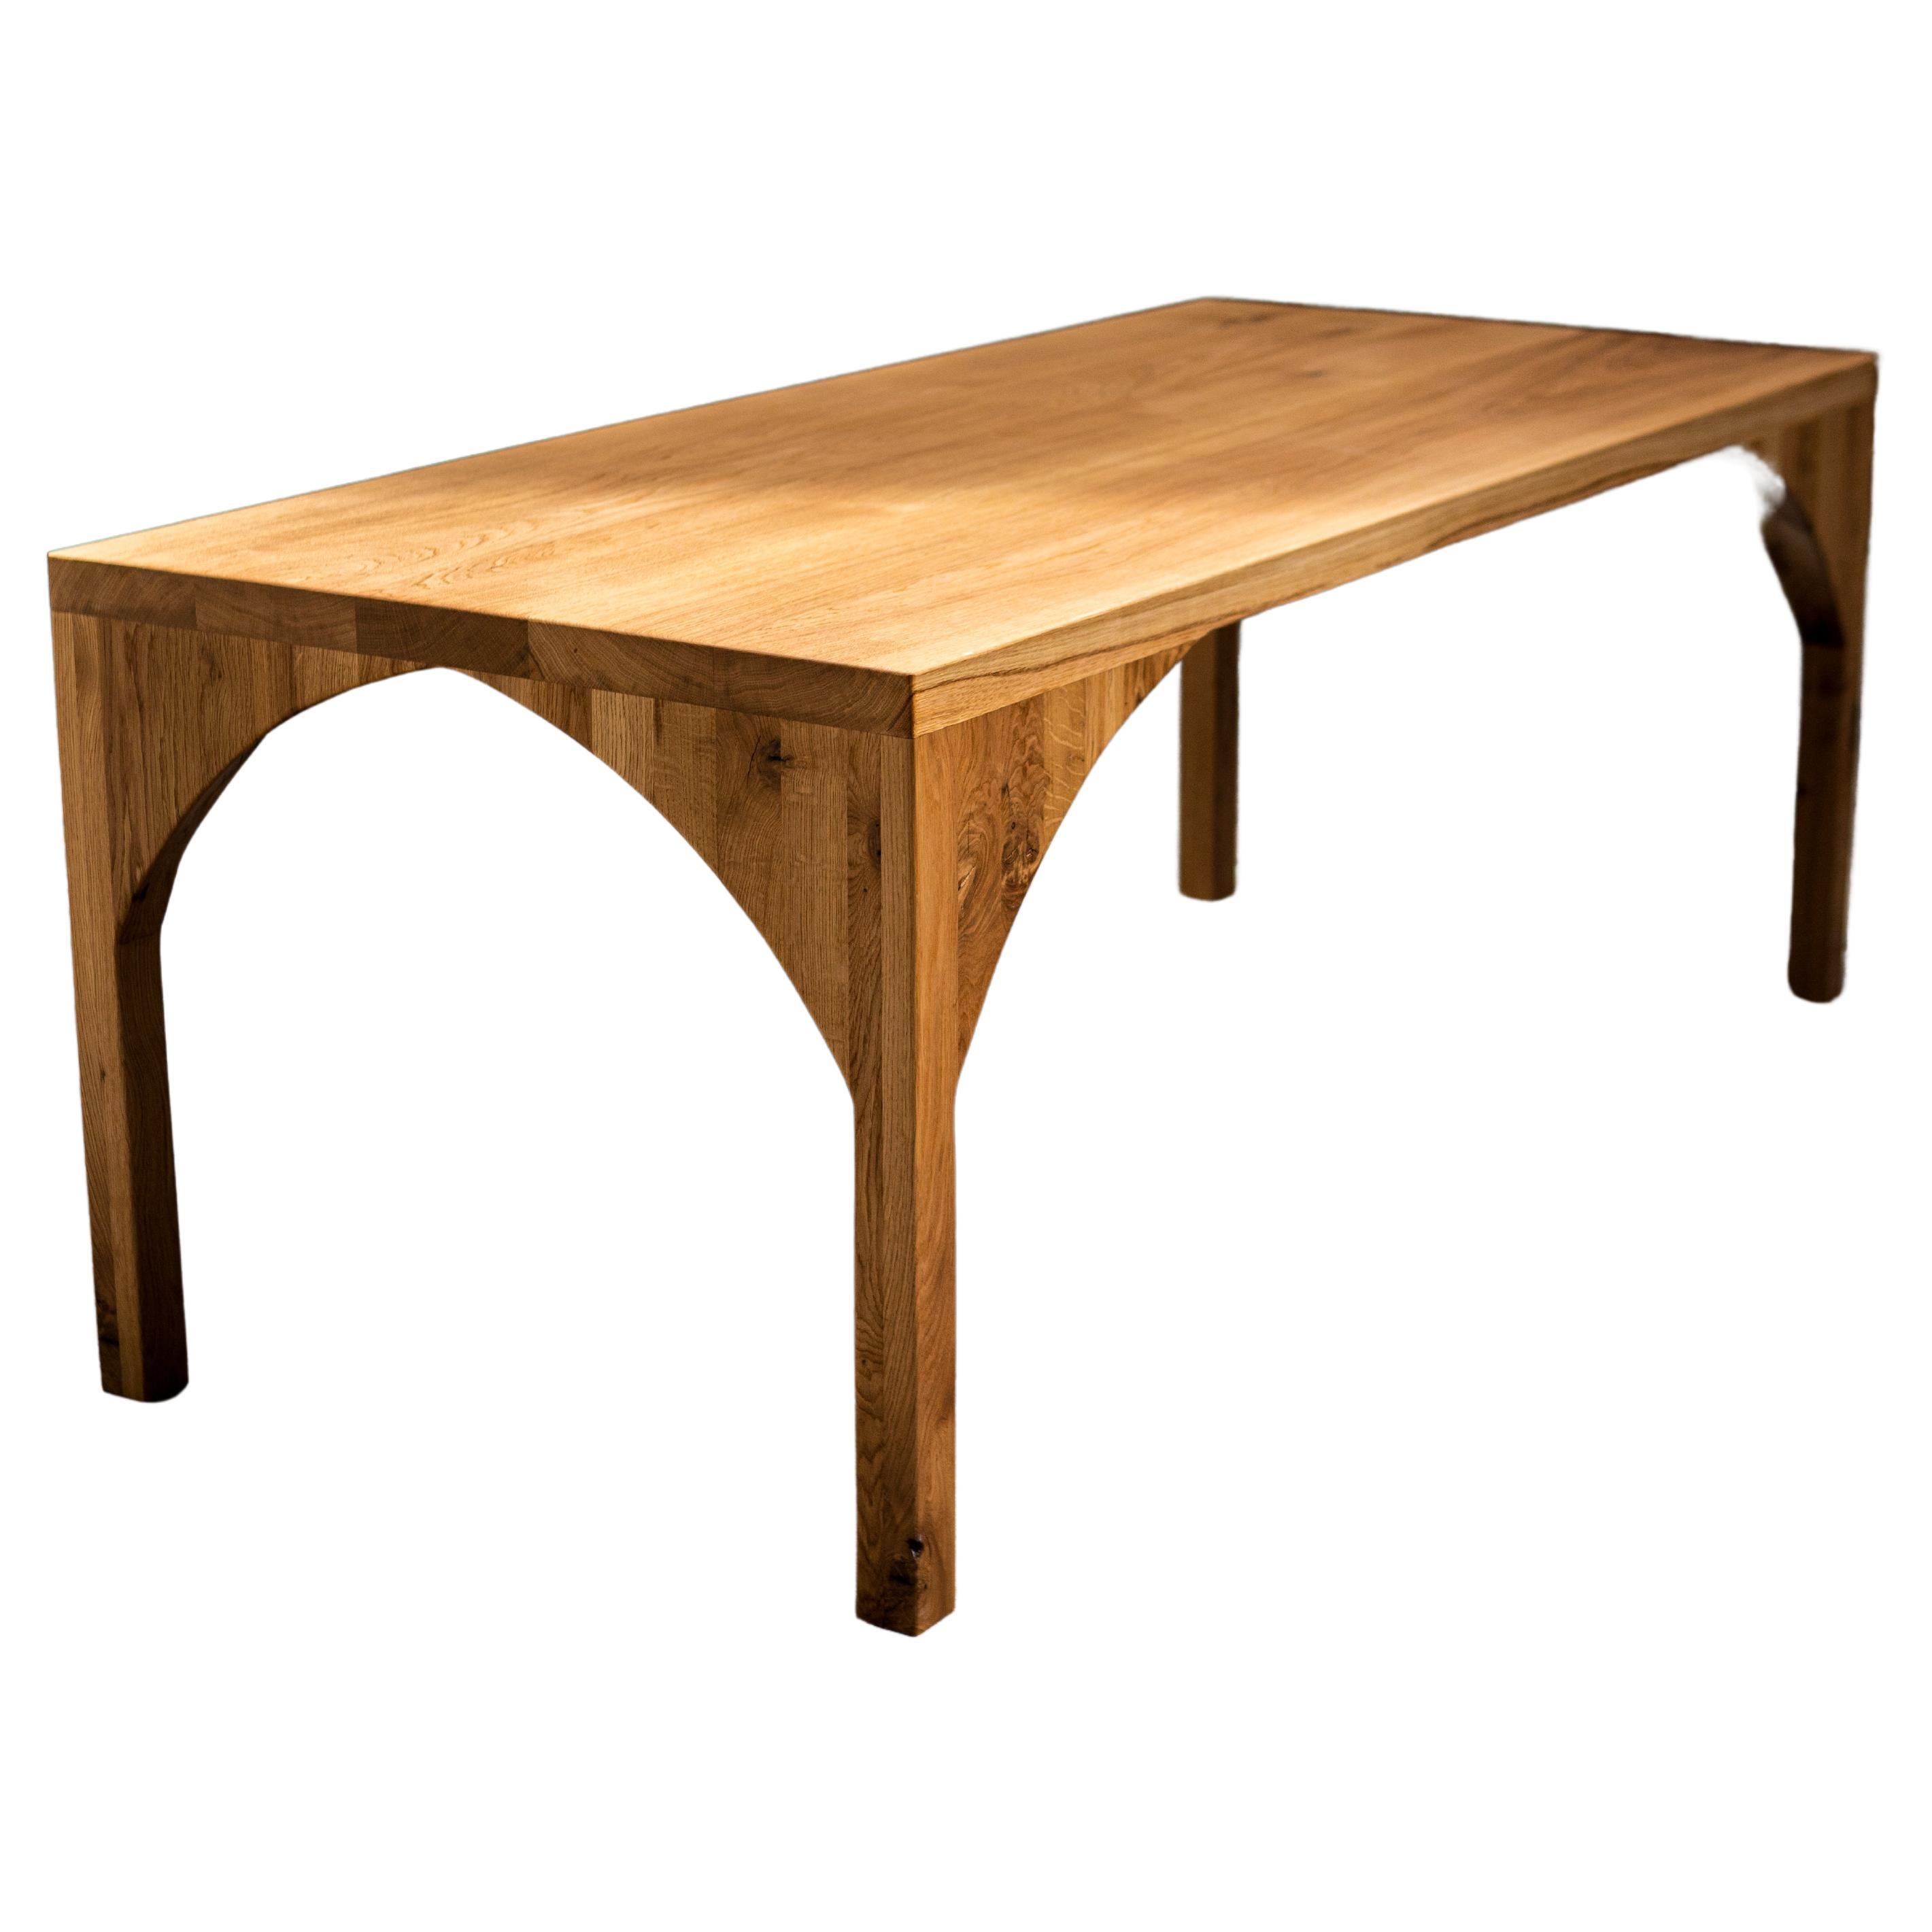 The Bamba Dining Table For Sale